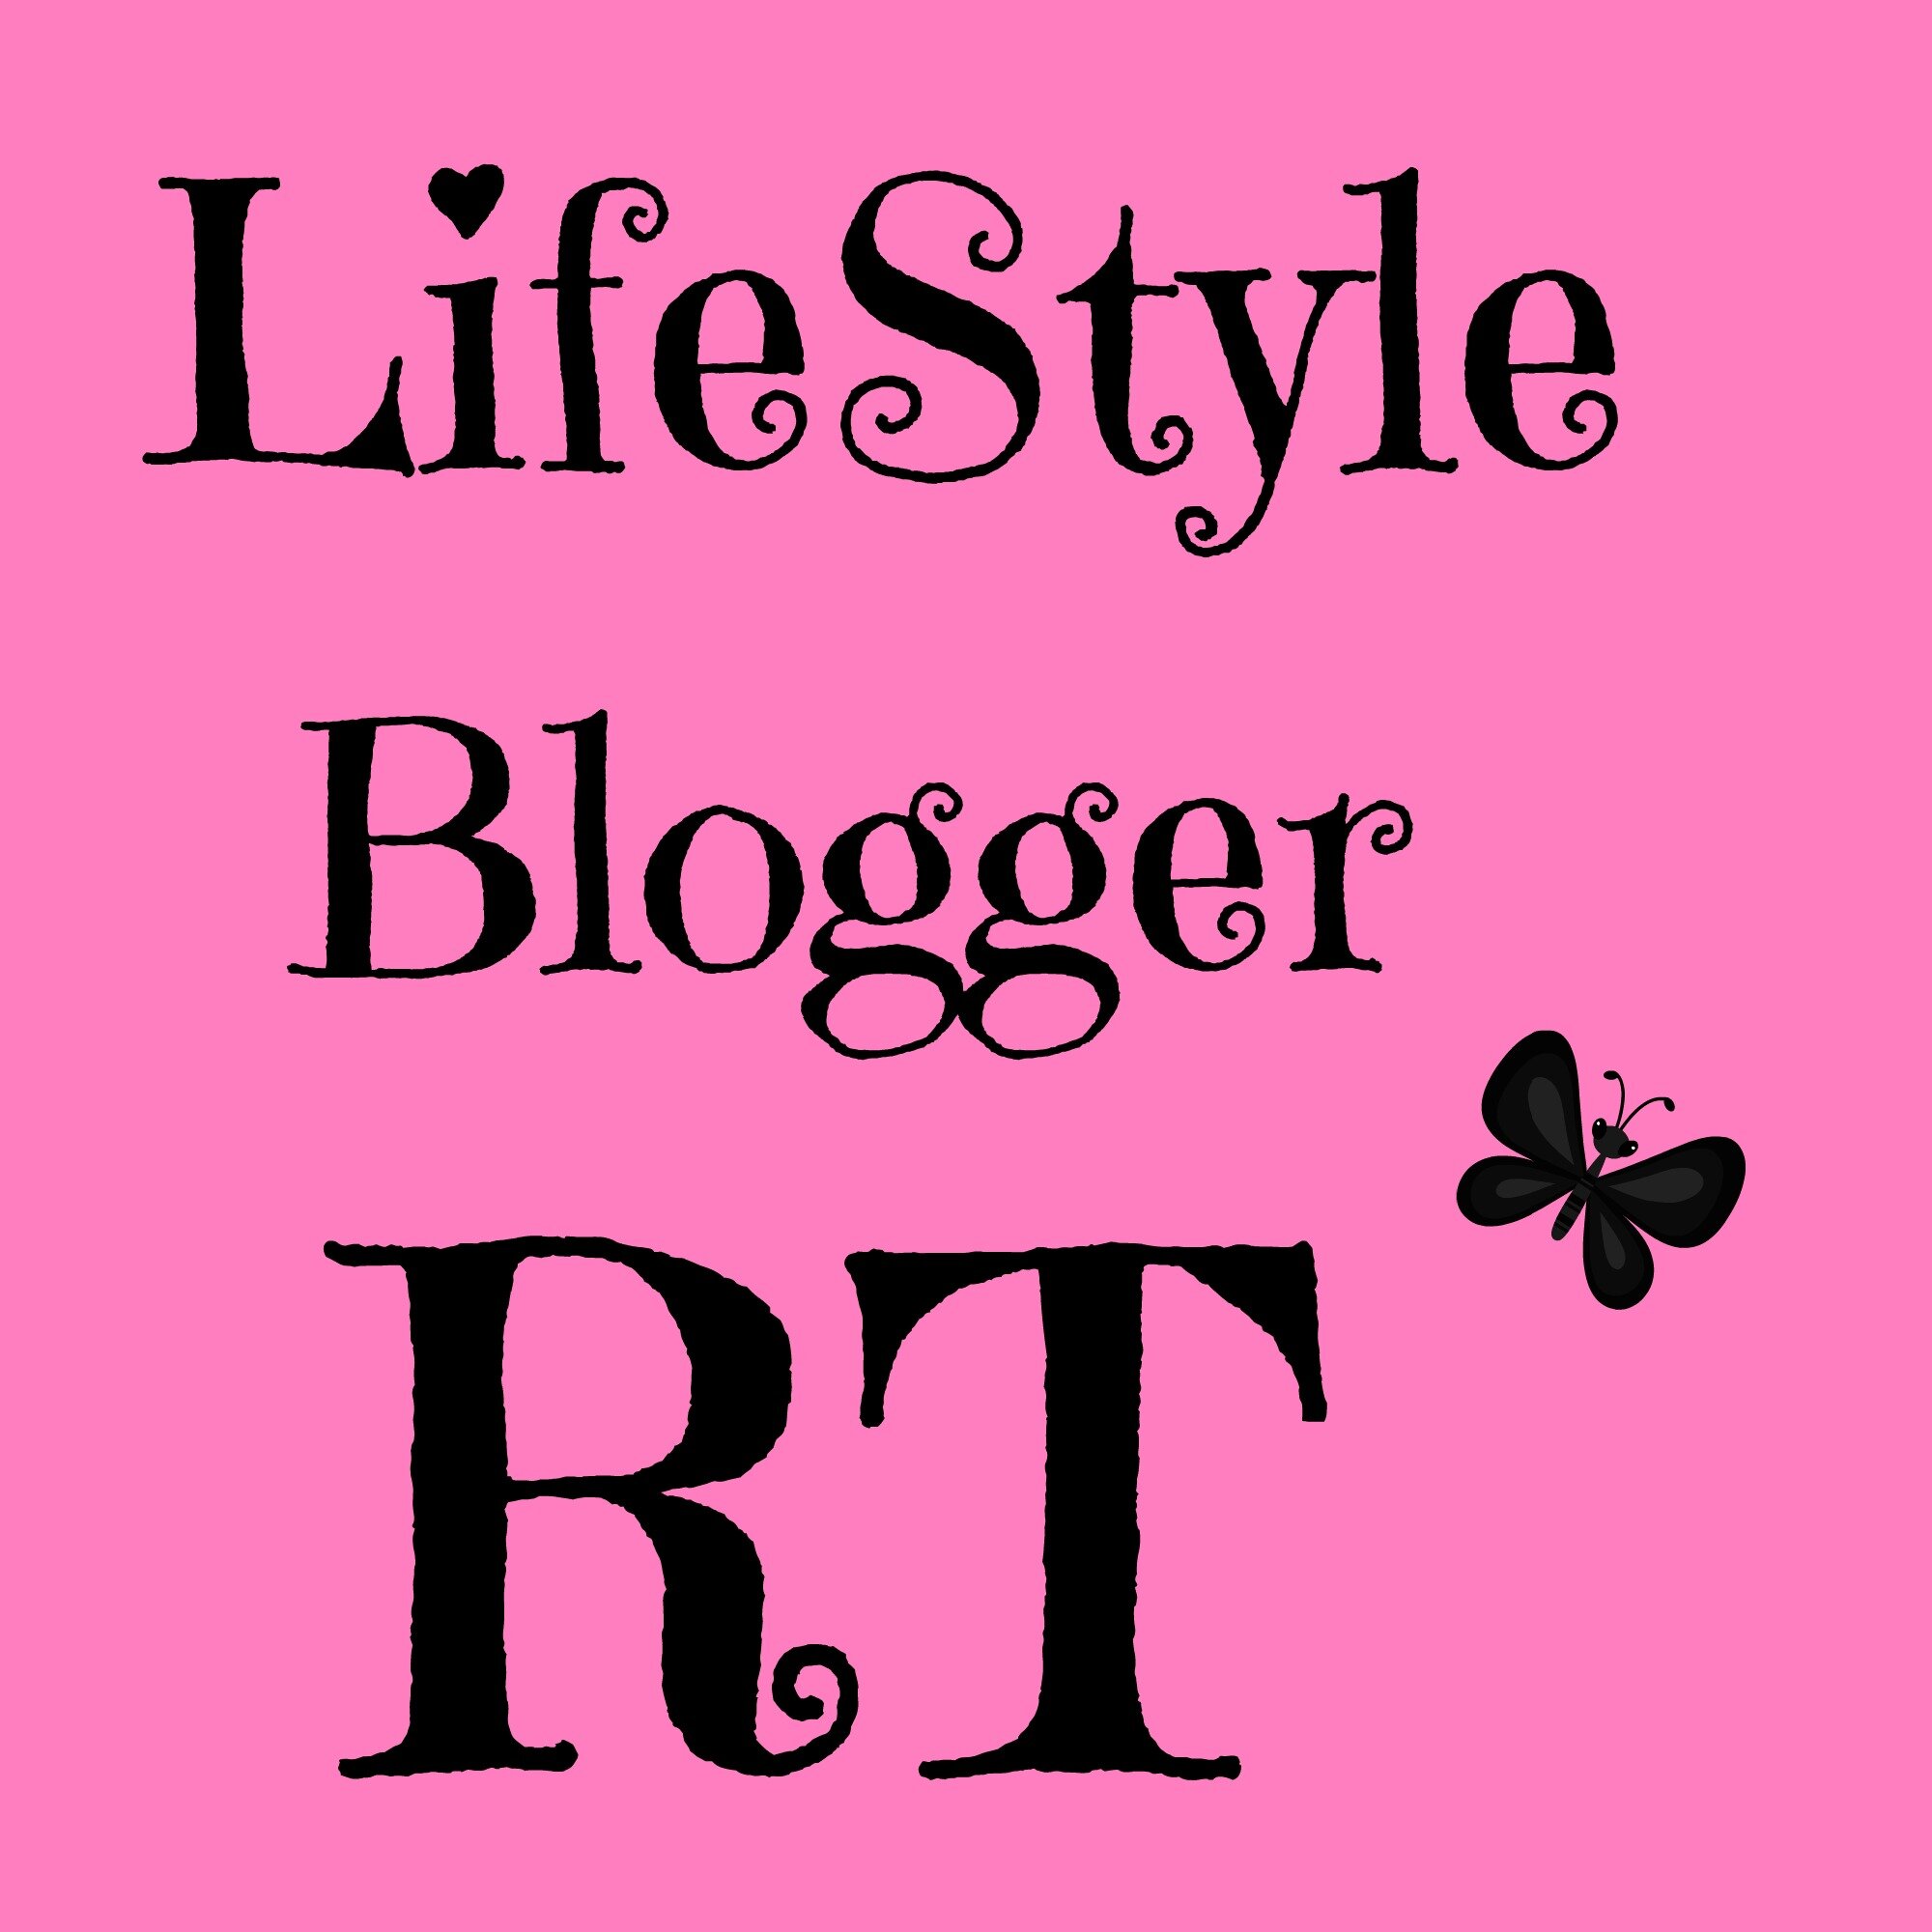 Supporting Lifestyle bloggers- Lifestlye bloggers mention @Lblogger_RT in your blog tweets for a retweet #lbloggers